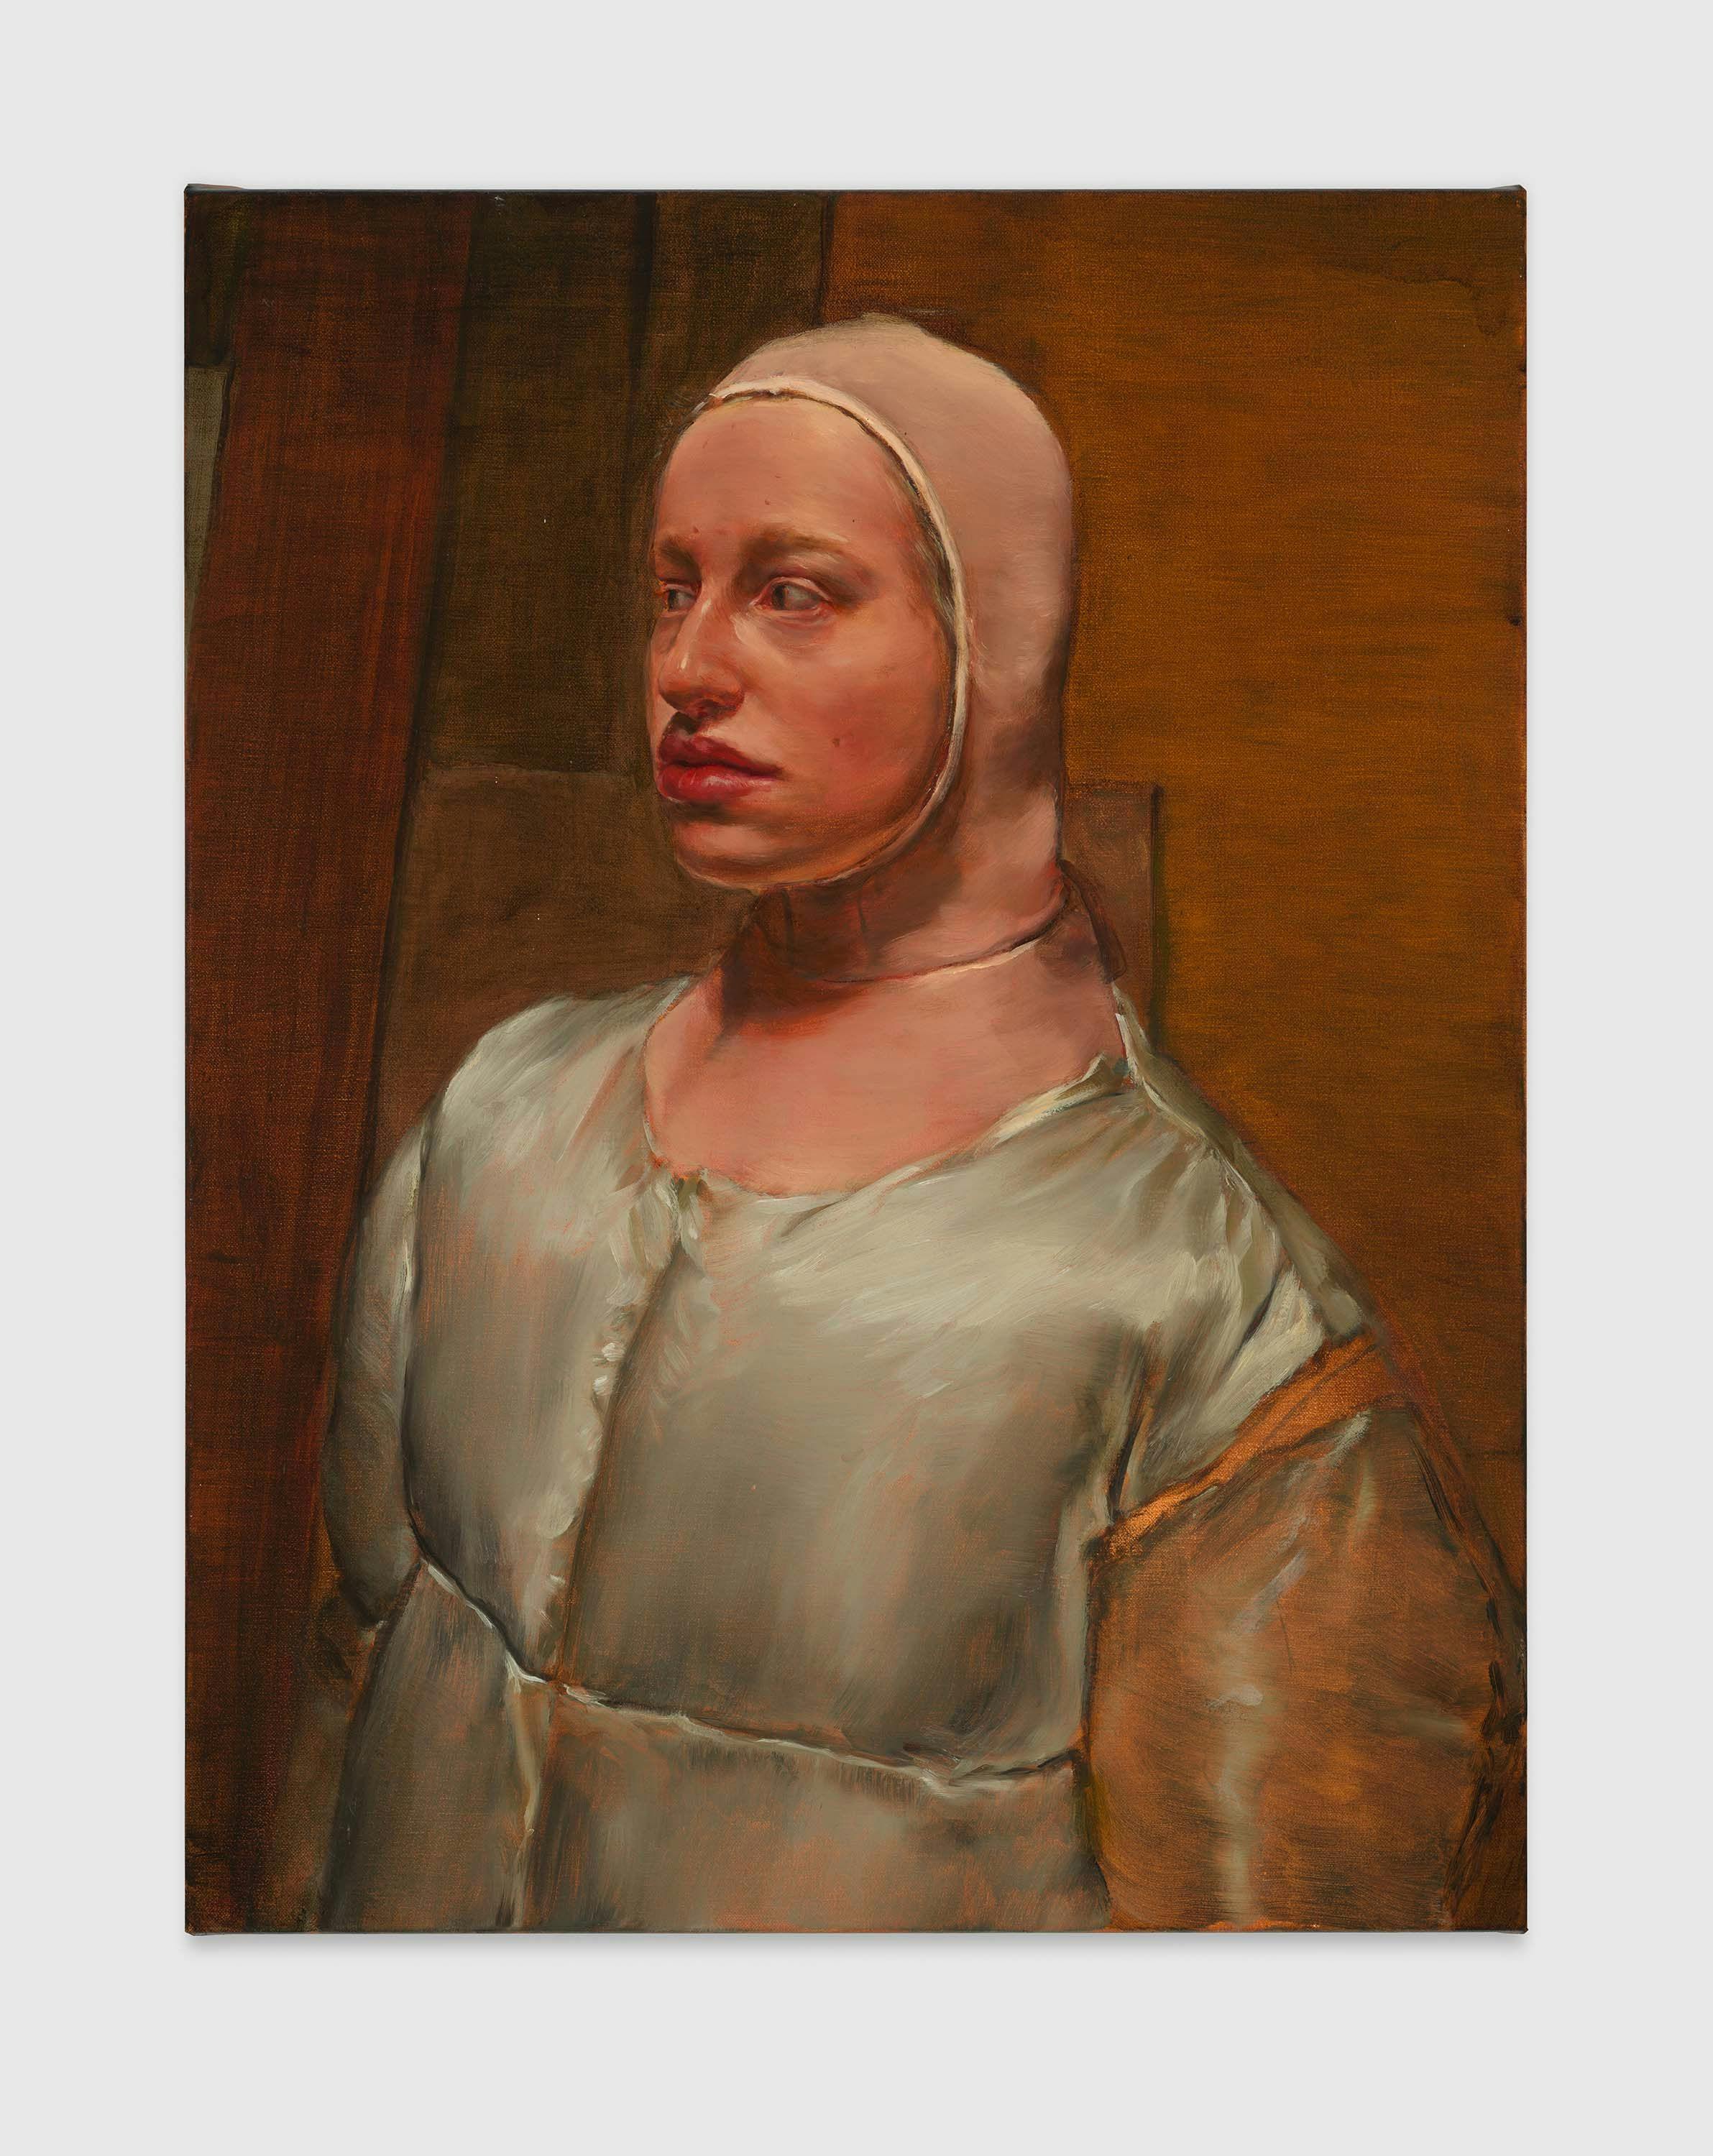 A painting by Michaël Borremans, titled The Third Double, dated 2022.